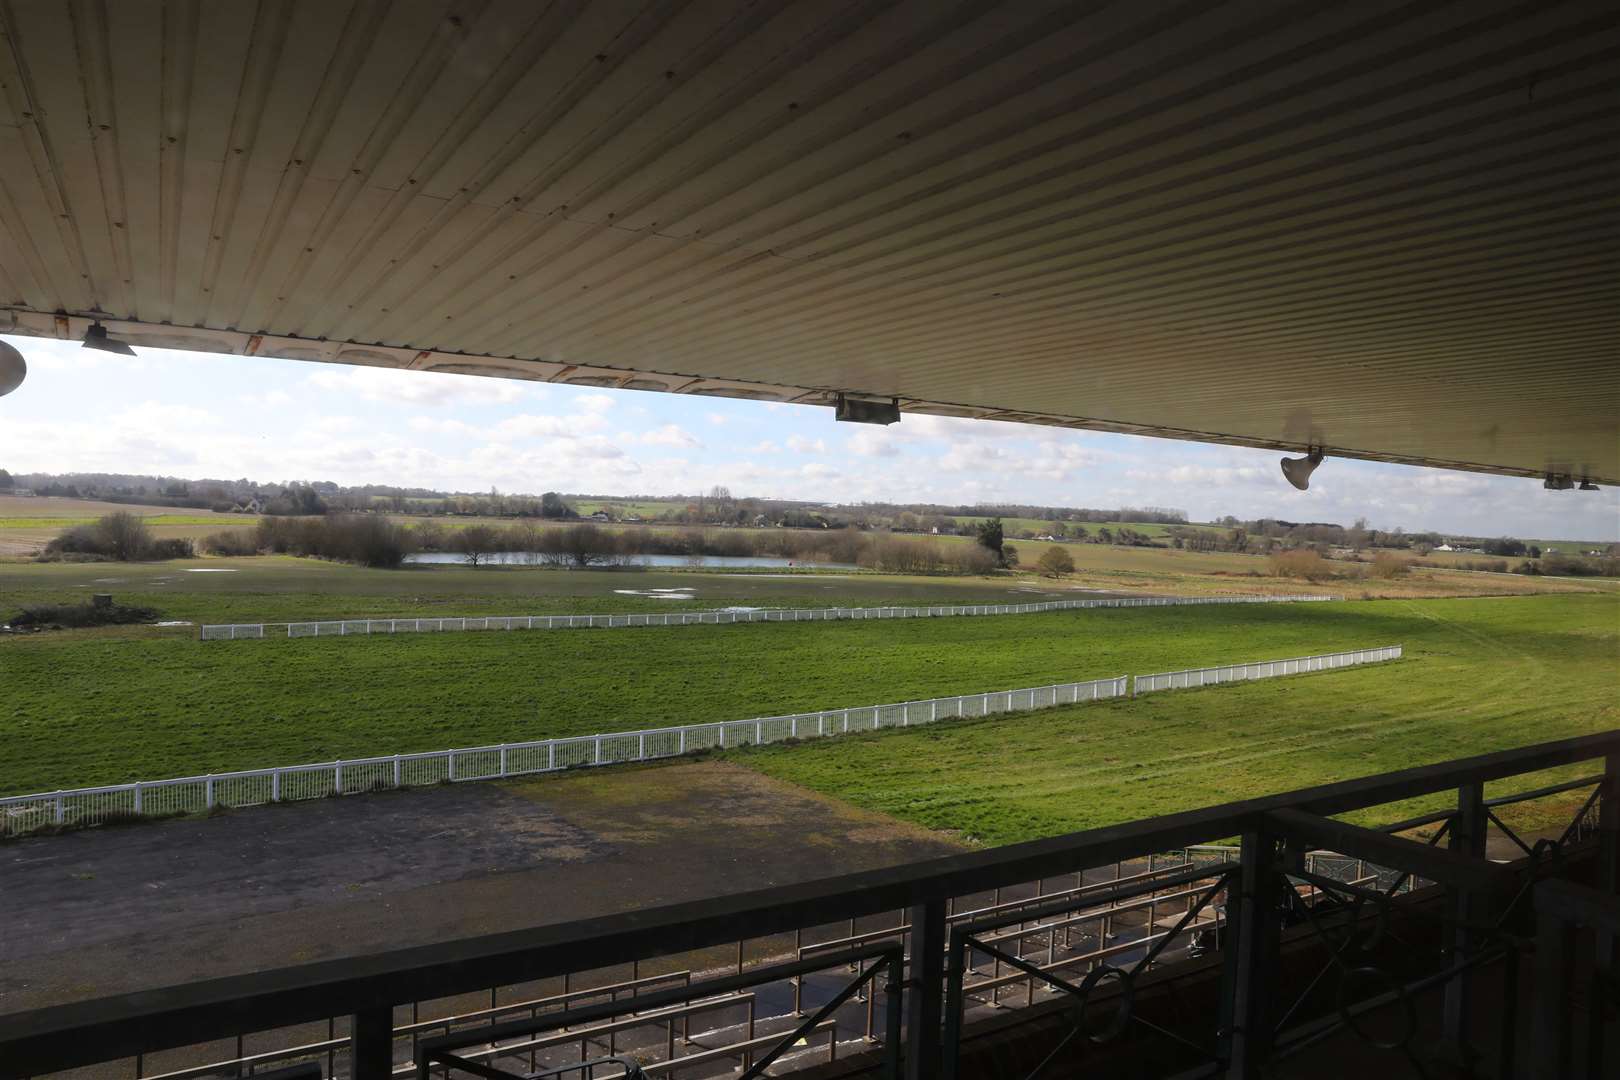 The racecourse has been closed for many years and is now owned by the council. Picture: Andy Jones